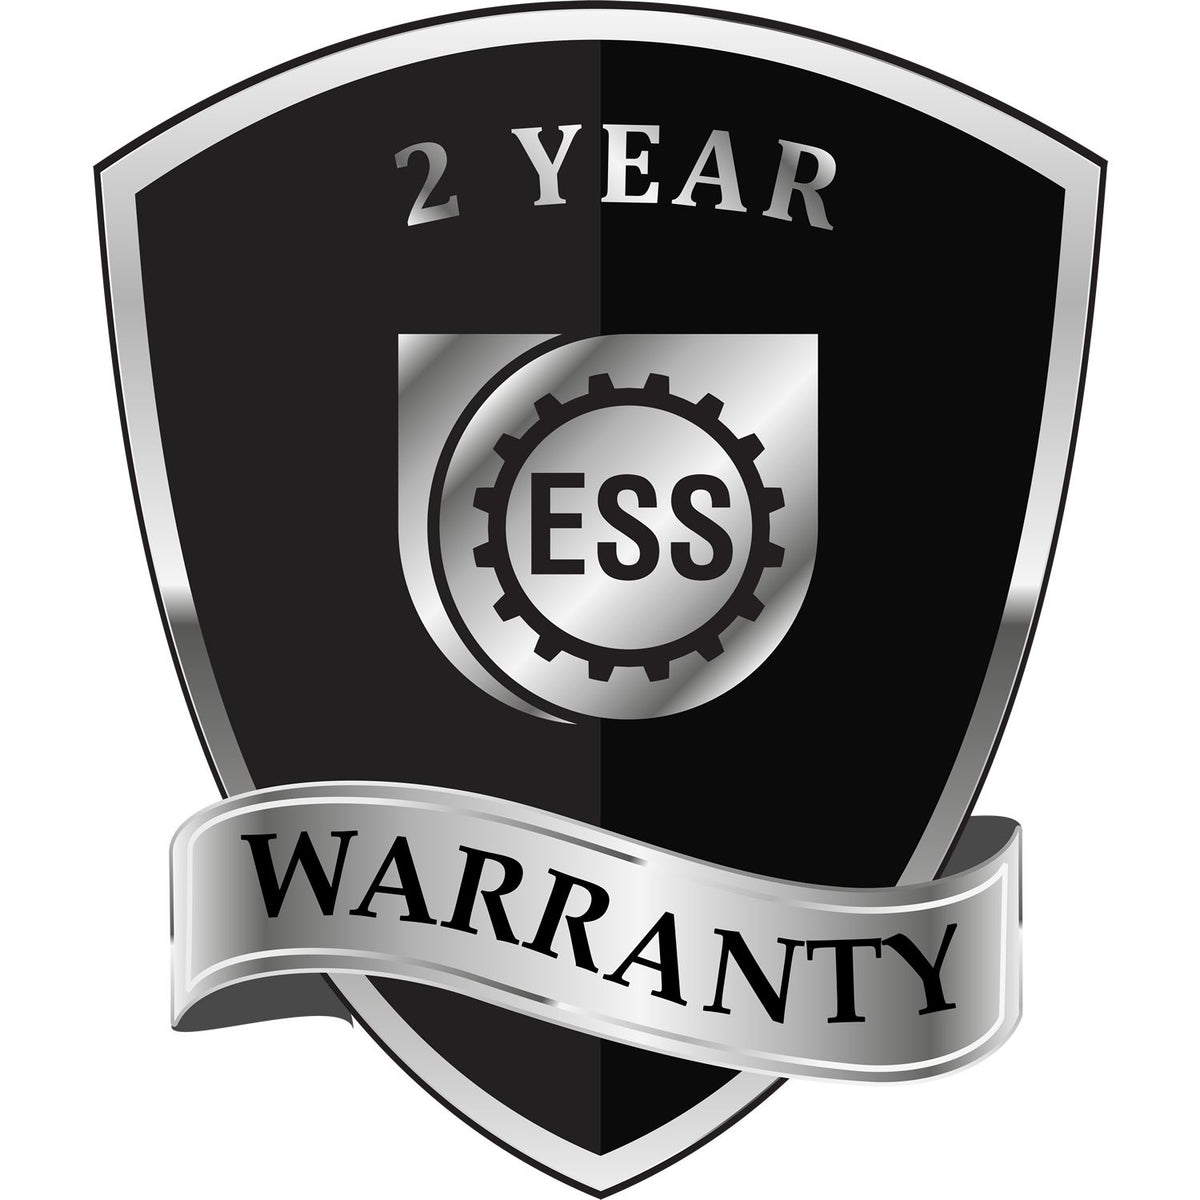 A black and silver badge or emblem showing warranty information for the State of Nevada Extended Long Reach Geologist Seal